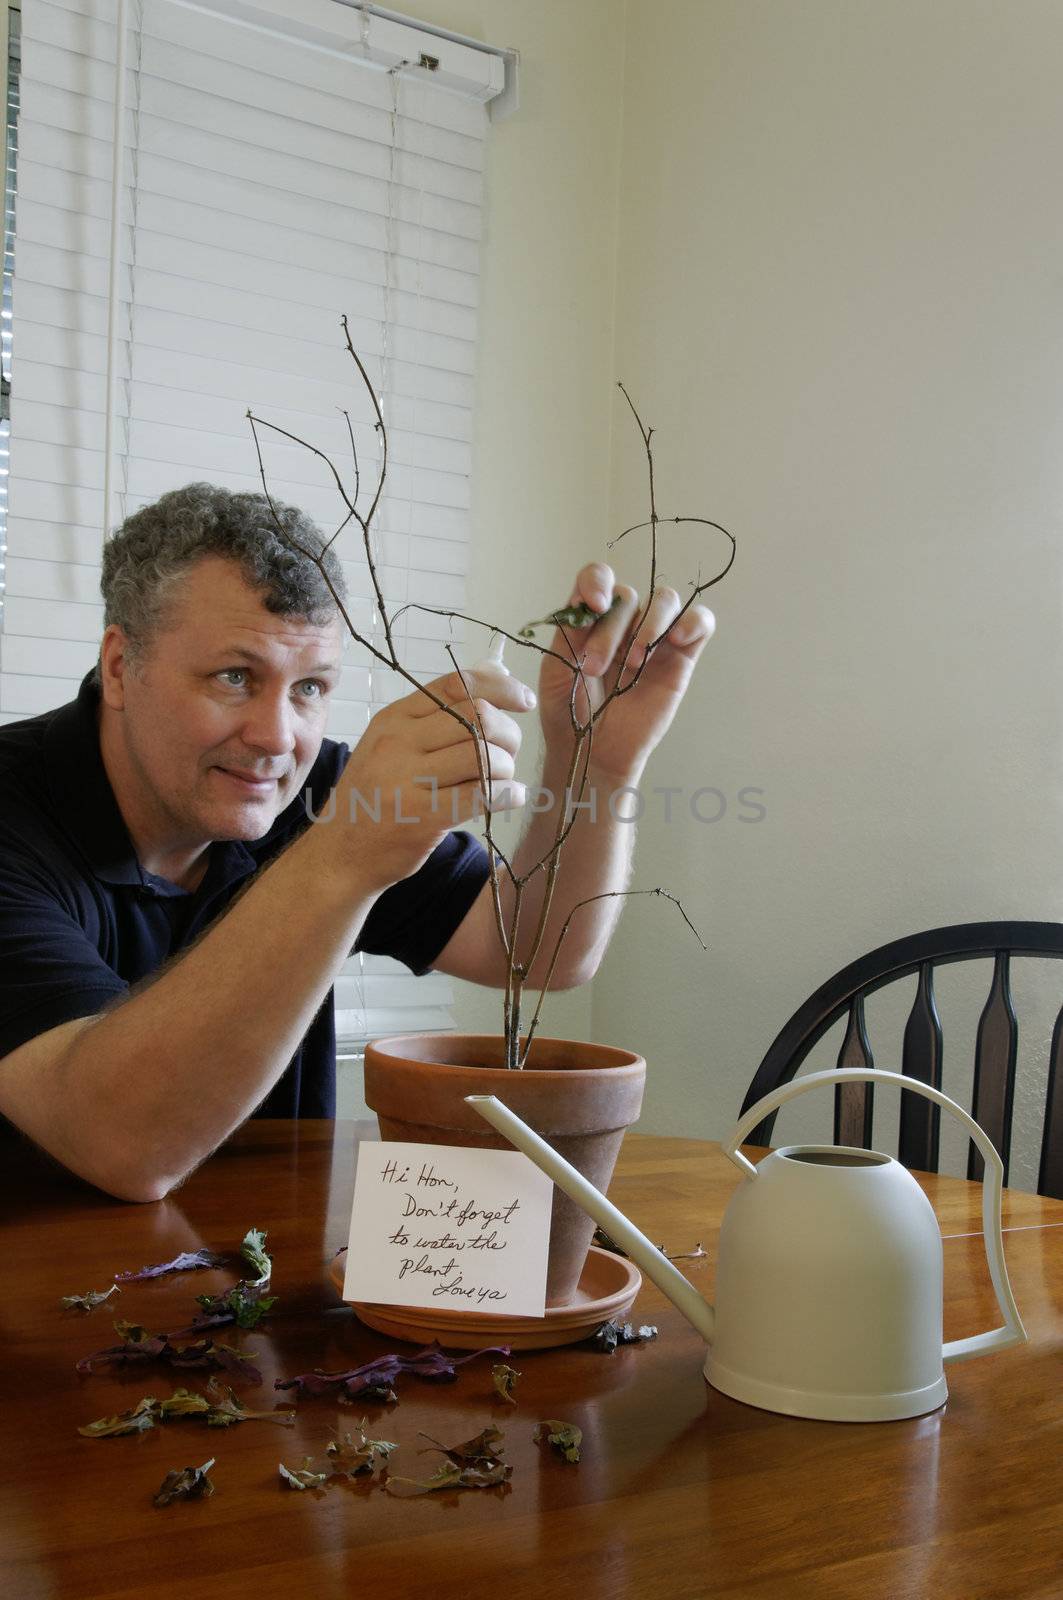 A man trying to glue a leaf to a plant that he forgot to water.